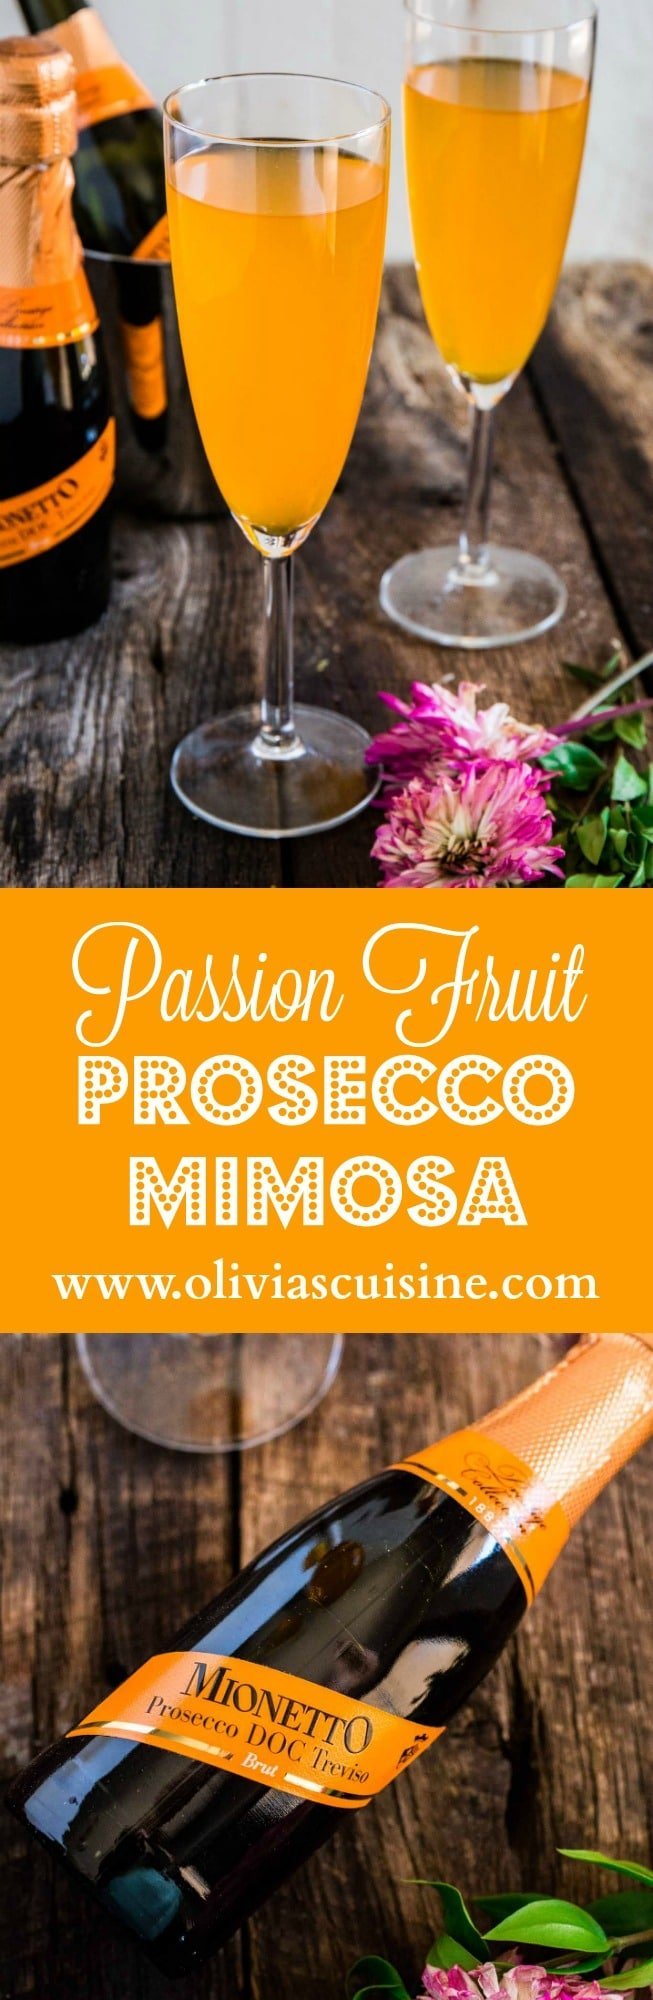 Passion Fruit Prosecco Mimosa | www.oliviascuisine.com | A refreshing and easy cocktail, made with only 2 ingredients: Passion Fruit juice and Mionetto Prosecco! MyMionetto (Msg 4 21+) AD